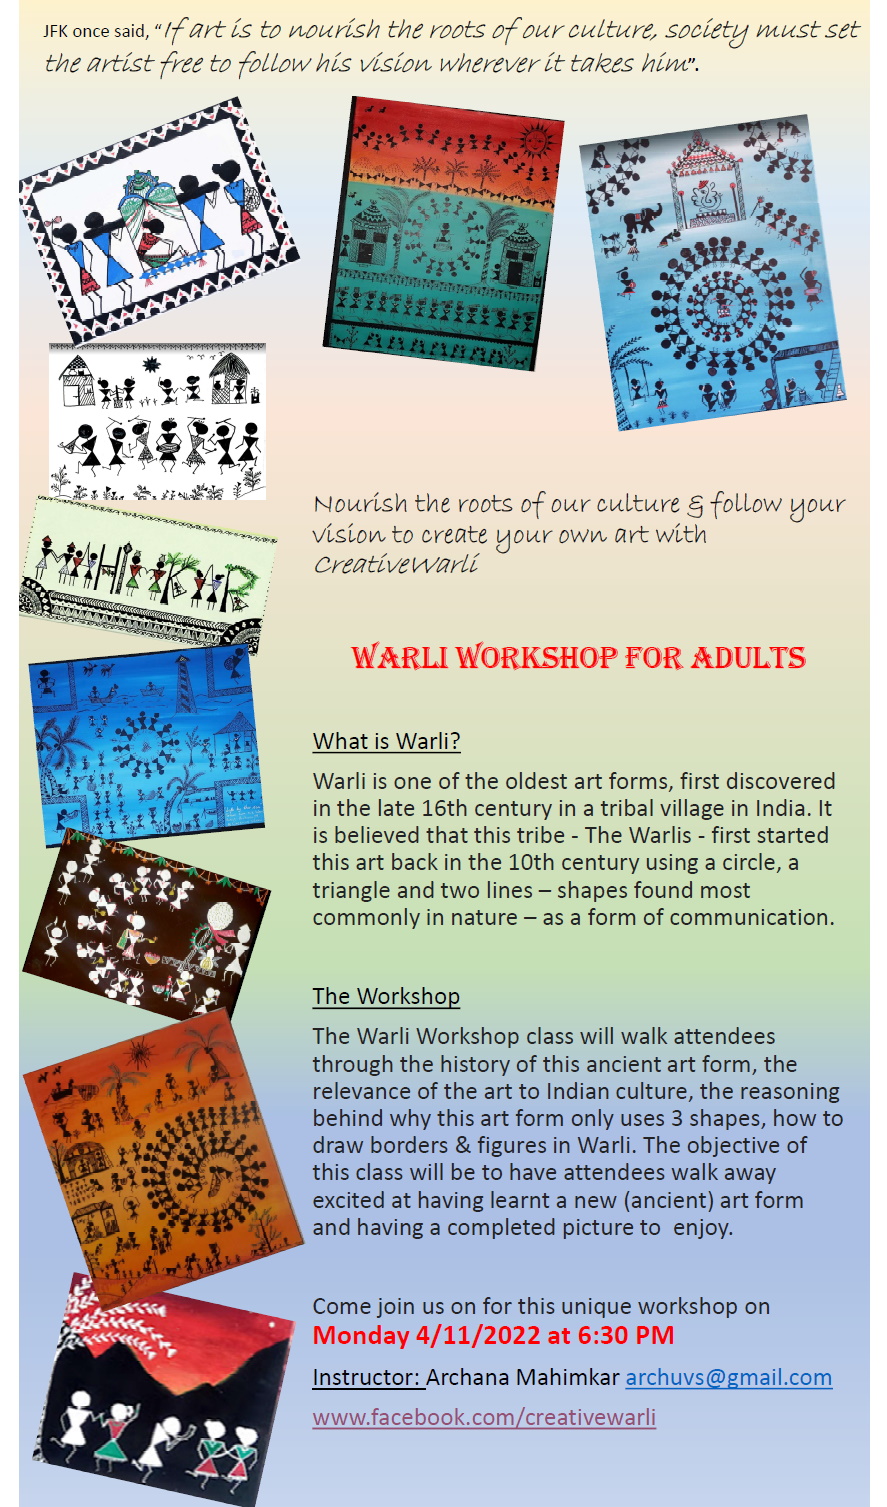 An image of a flyer with examples of warli art across the top and down the left edge.  A text description of the workshop is in the center right of the image.